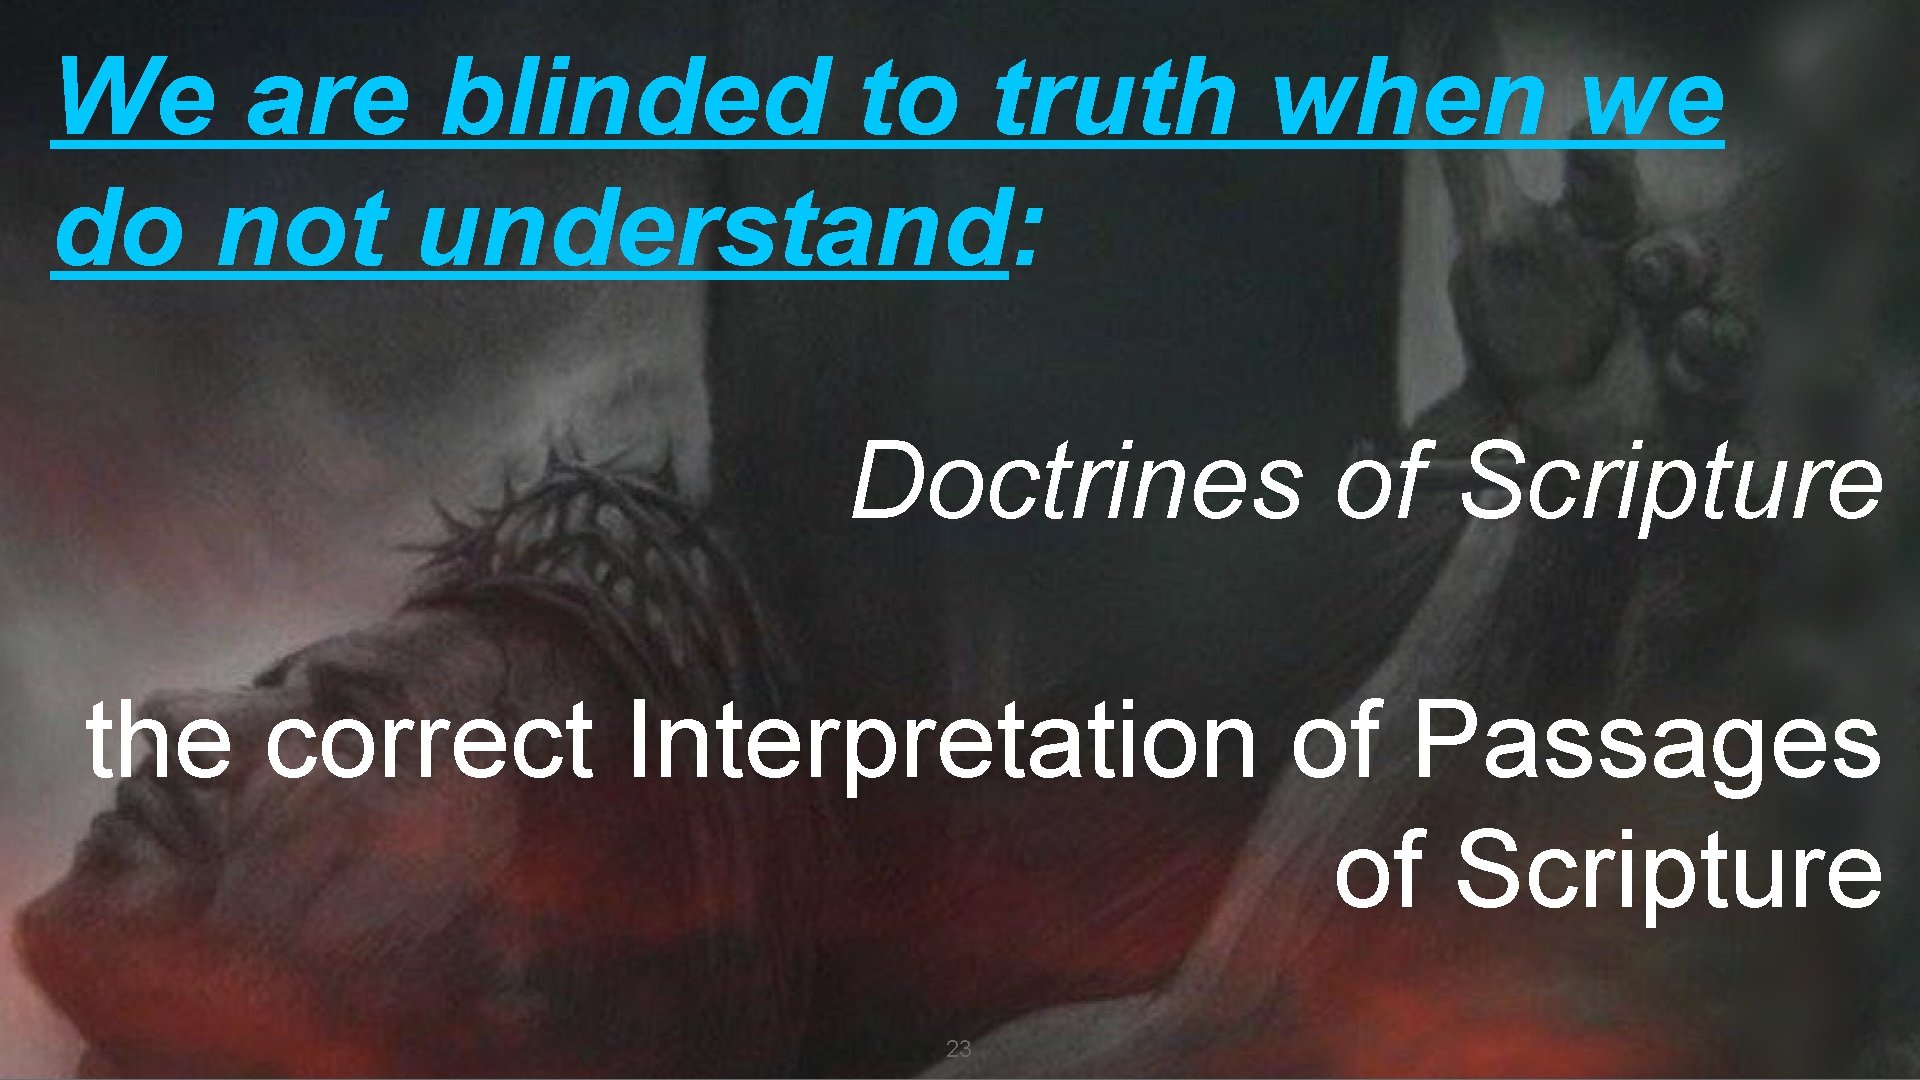 We are blinded to truth when we do not understand: Doctrines of Scripture the